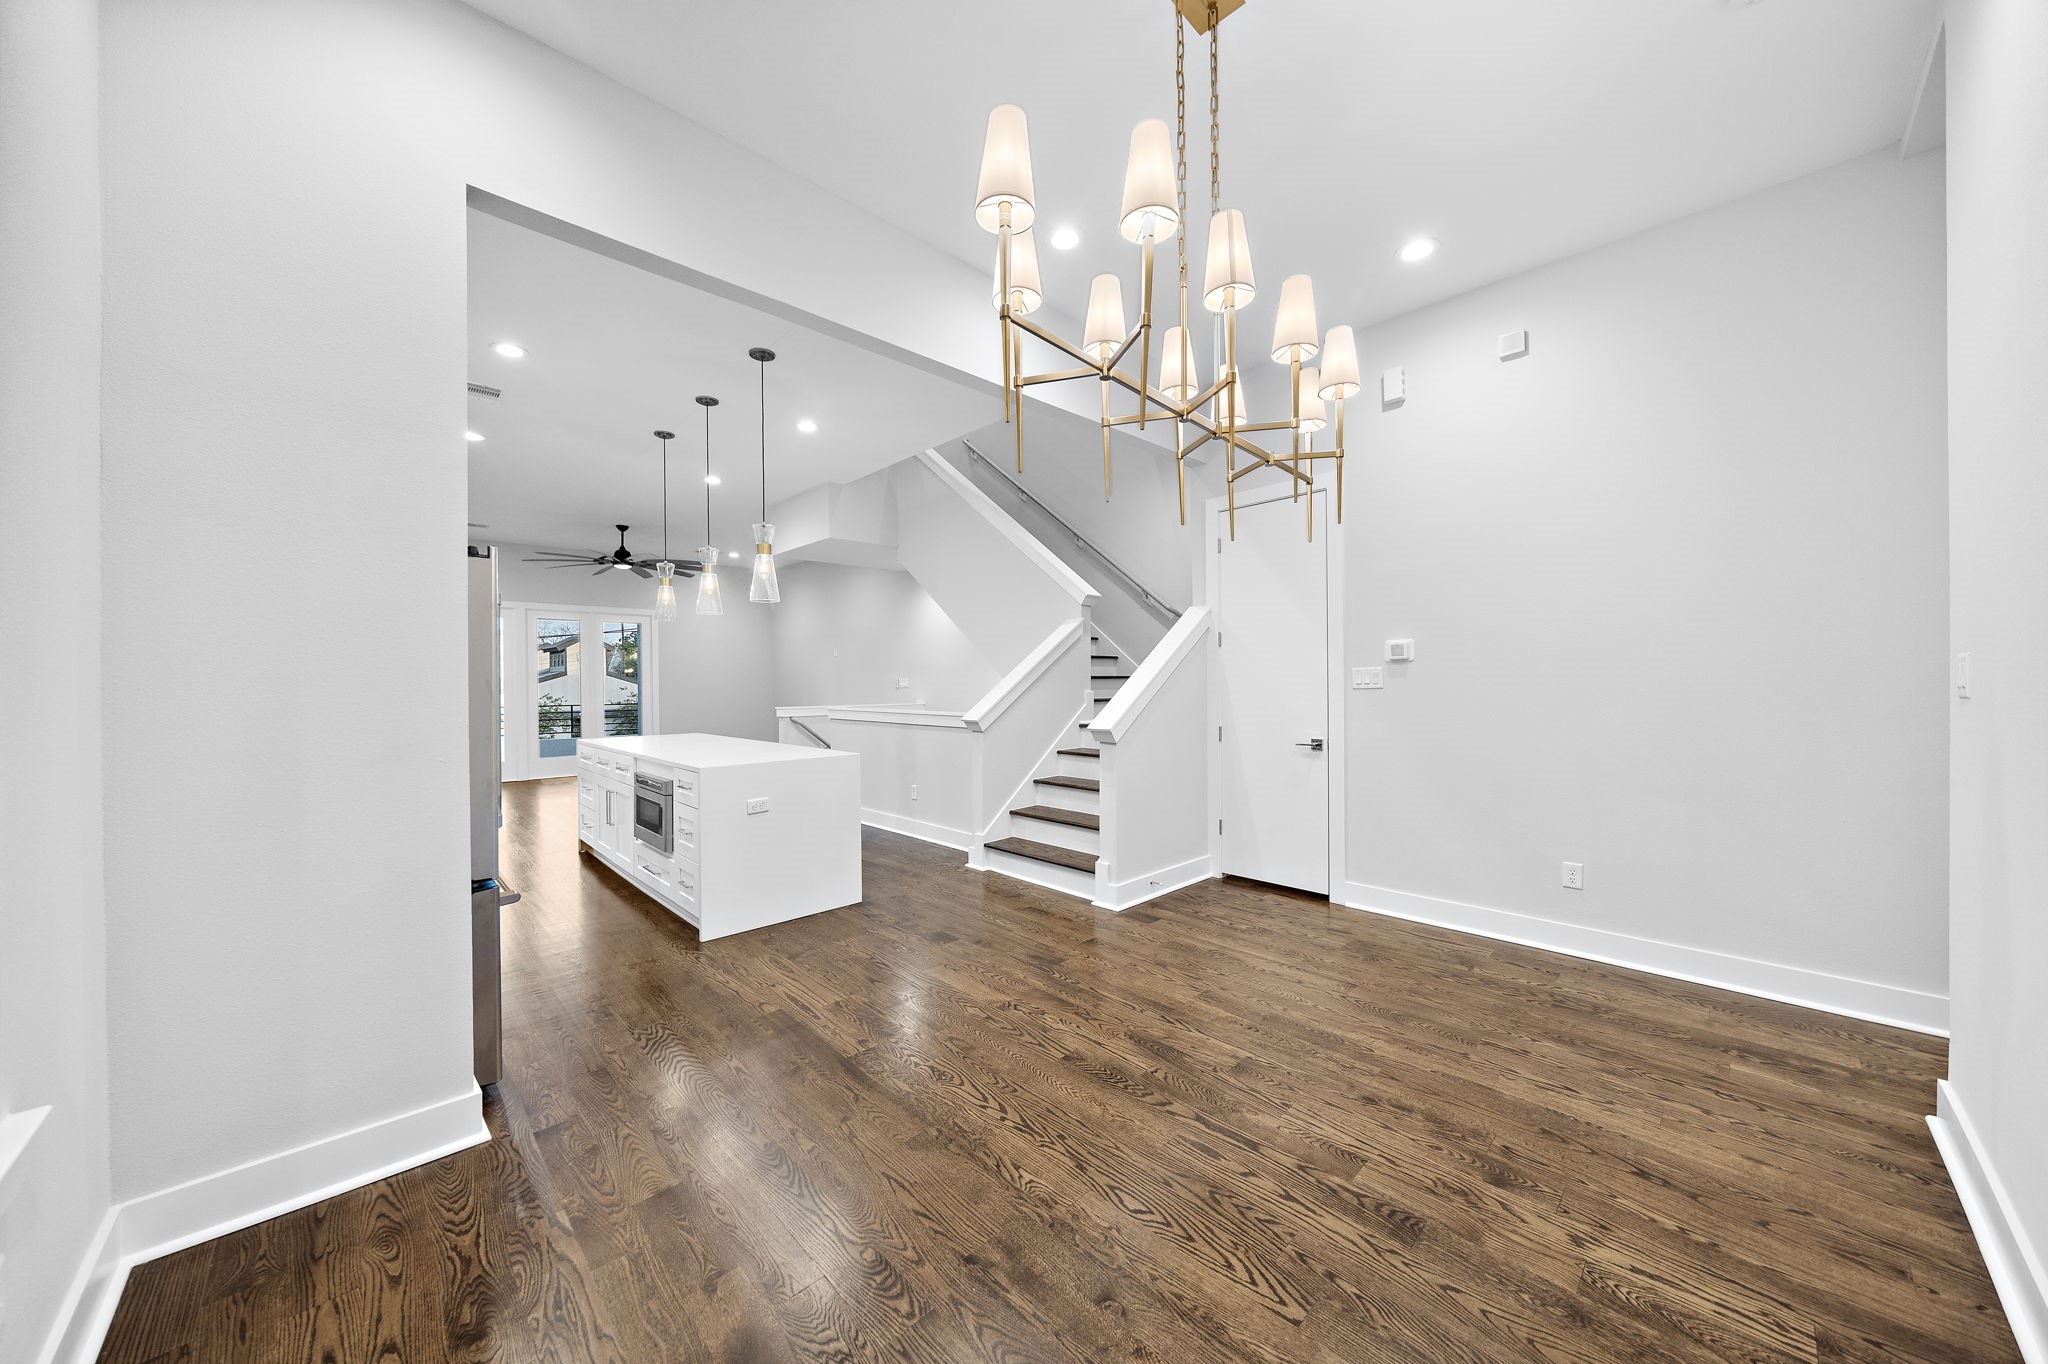 A separate dining room? Unheard of in todays open floorplans. The light fixture adds elegance to the room.